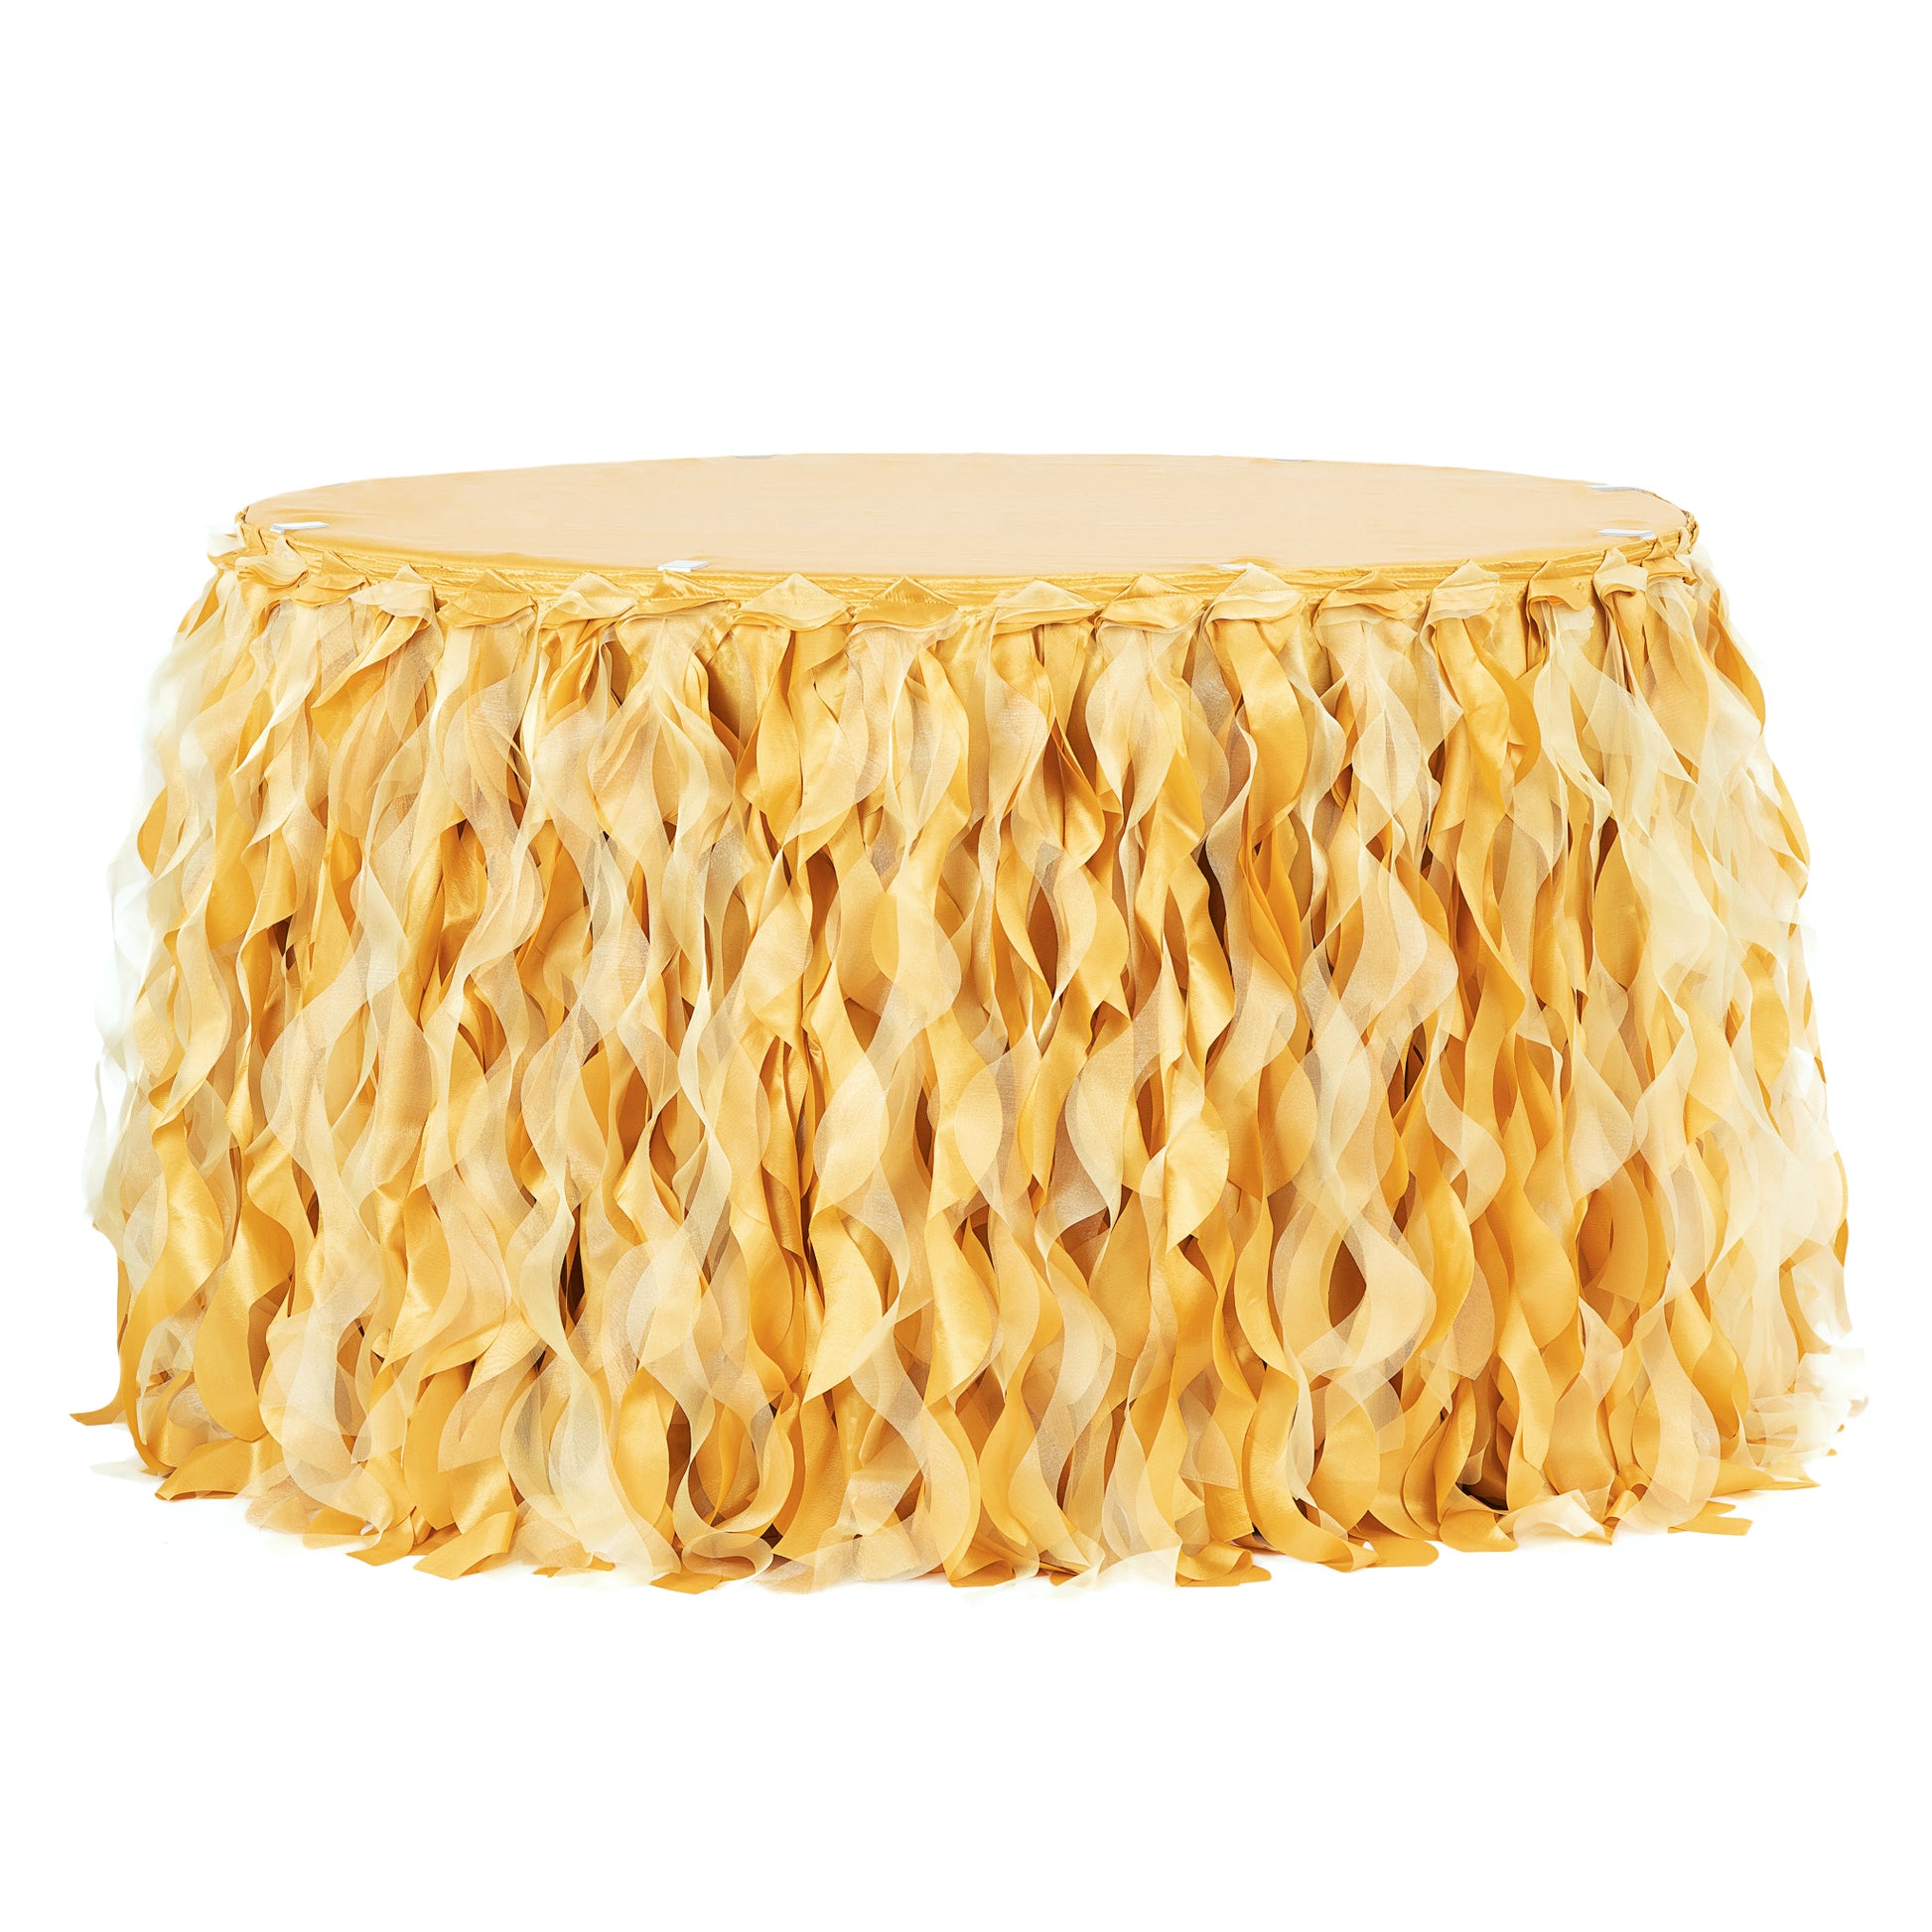 Curly Willow 14ft Table Skirt - Bright Gold - CV Linens